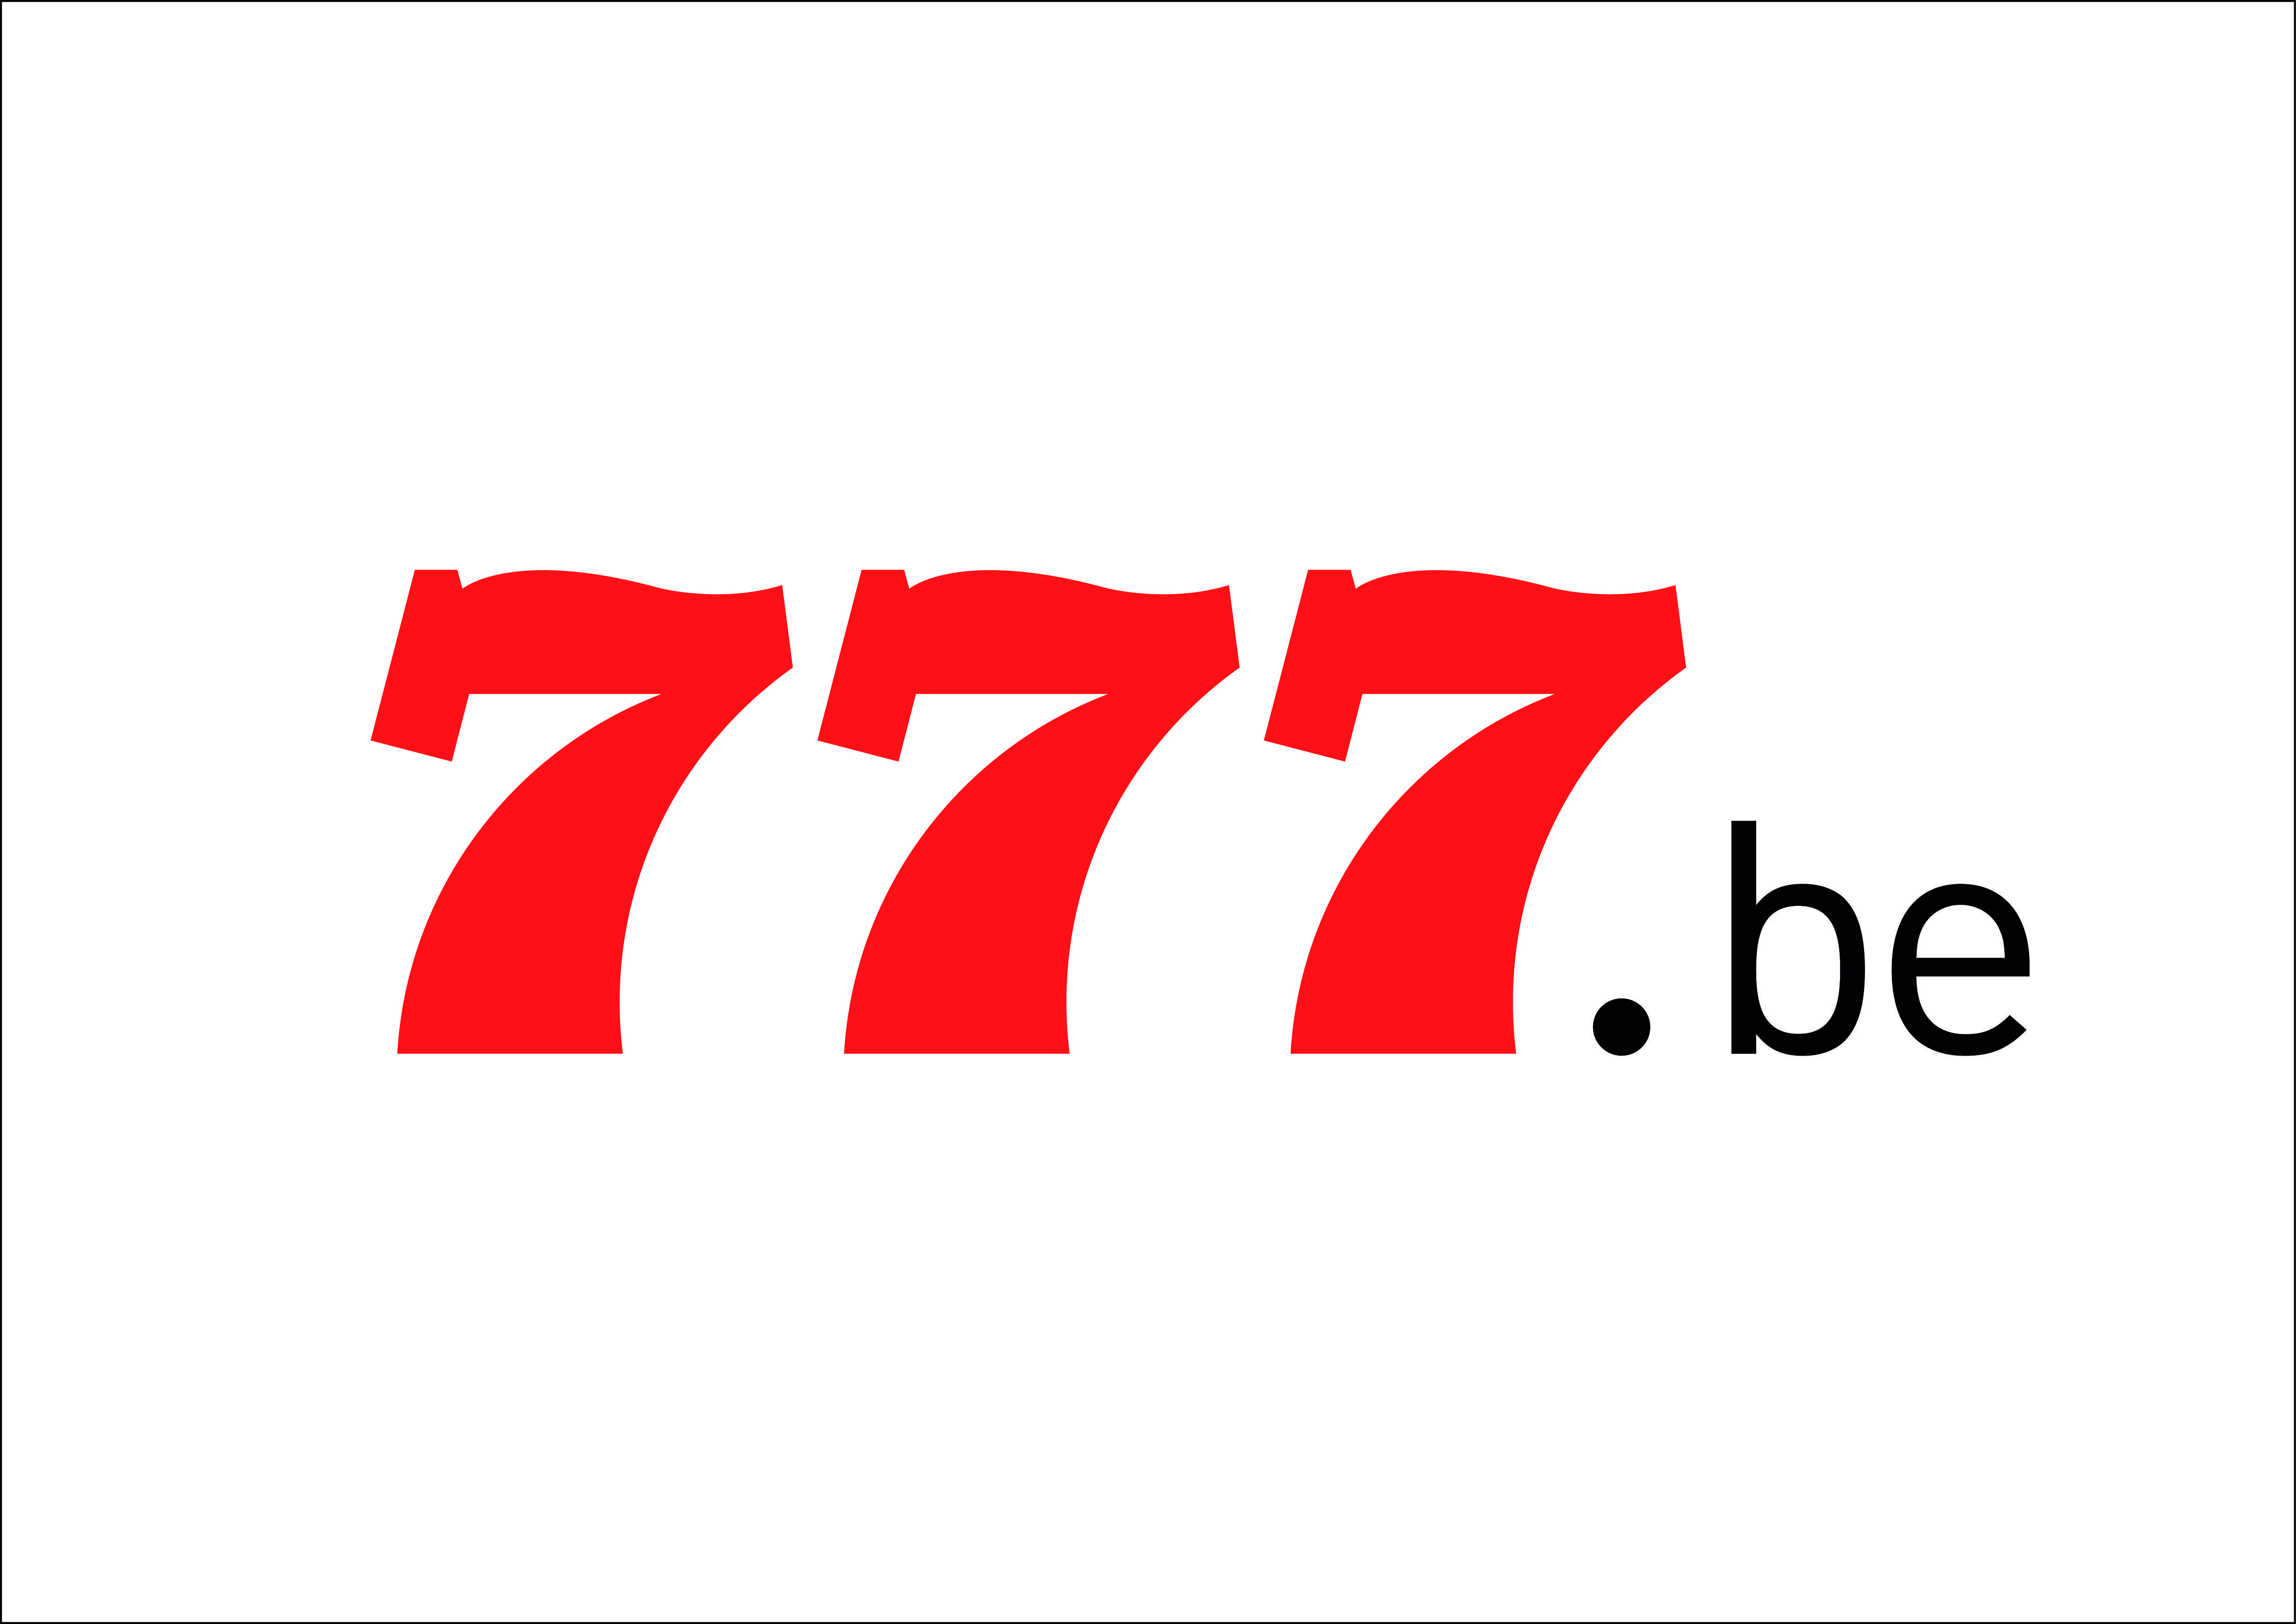 777 Logo - Pariplay Ltd. partners with 777.be online casino | AGB - Asia Gaming ...